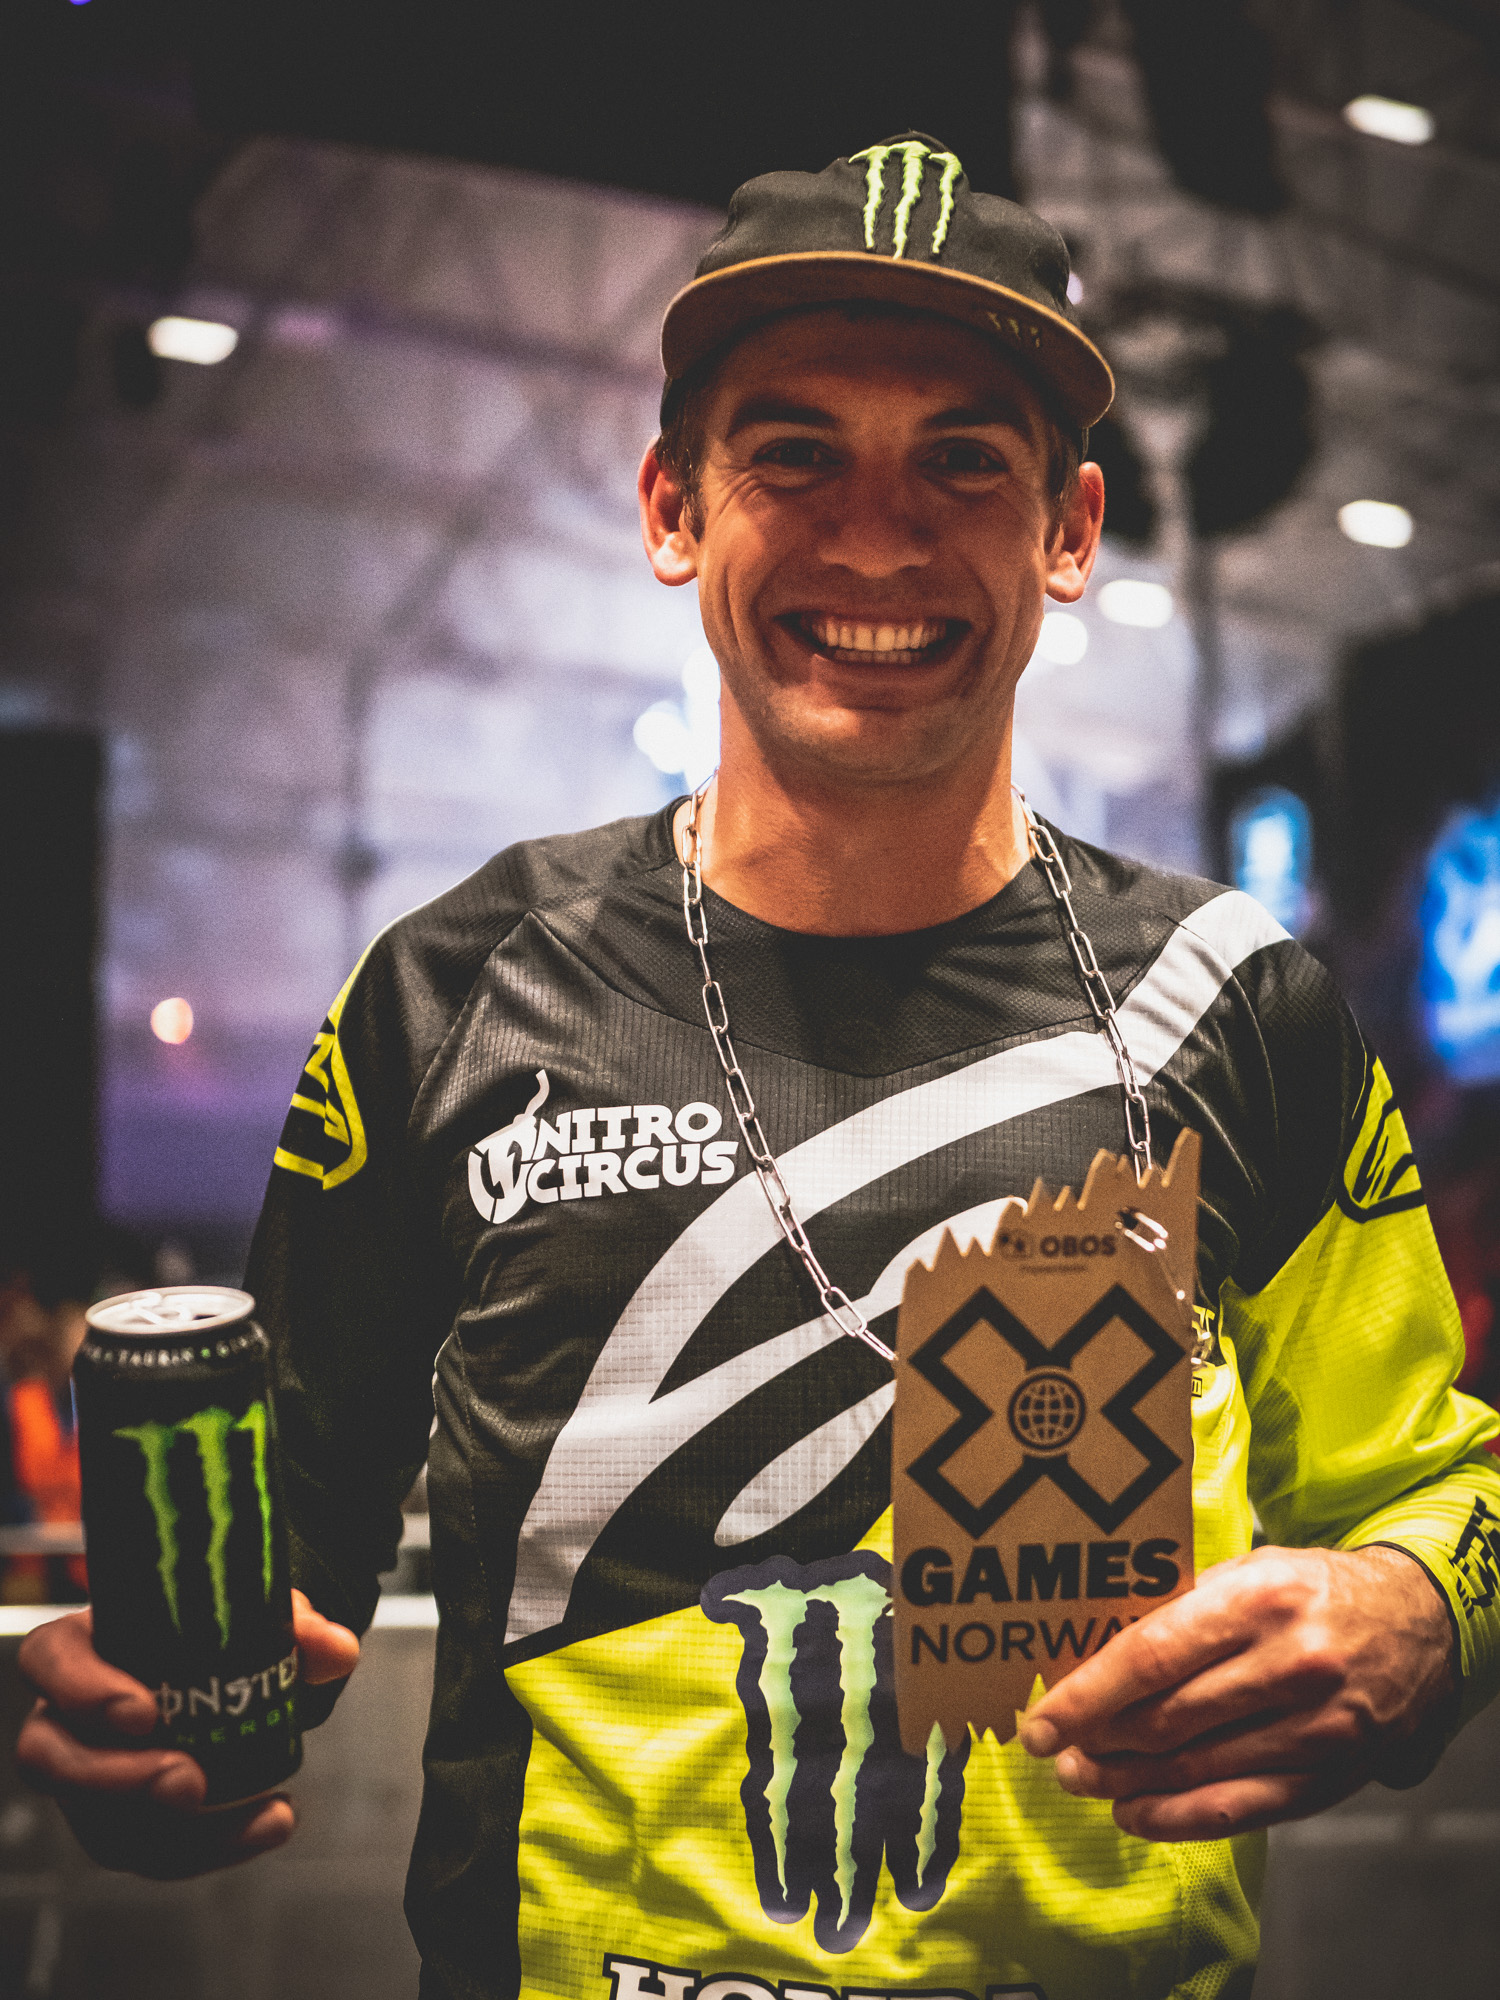 Monster Energy's Josh Sheehan Takes Bronze in Moto X Best Trick at X Games Norway 2019